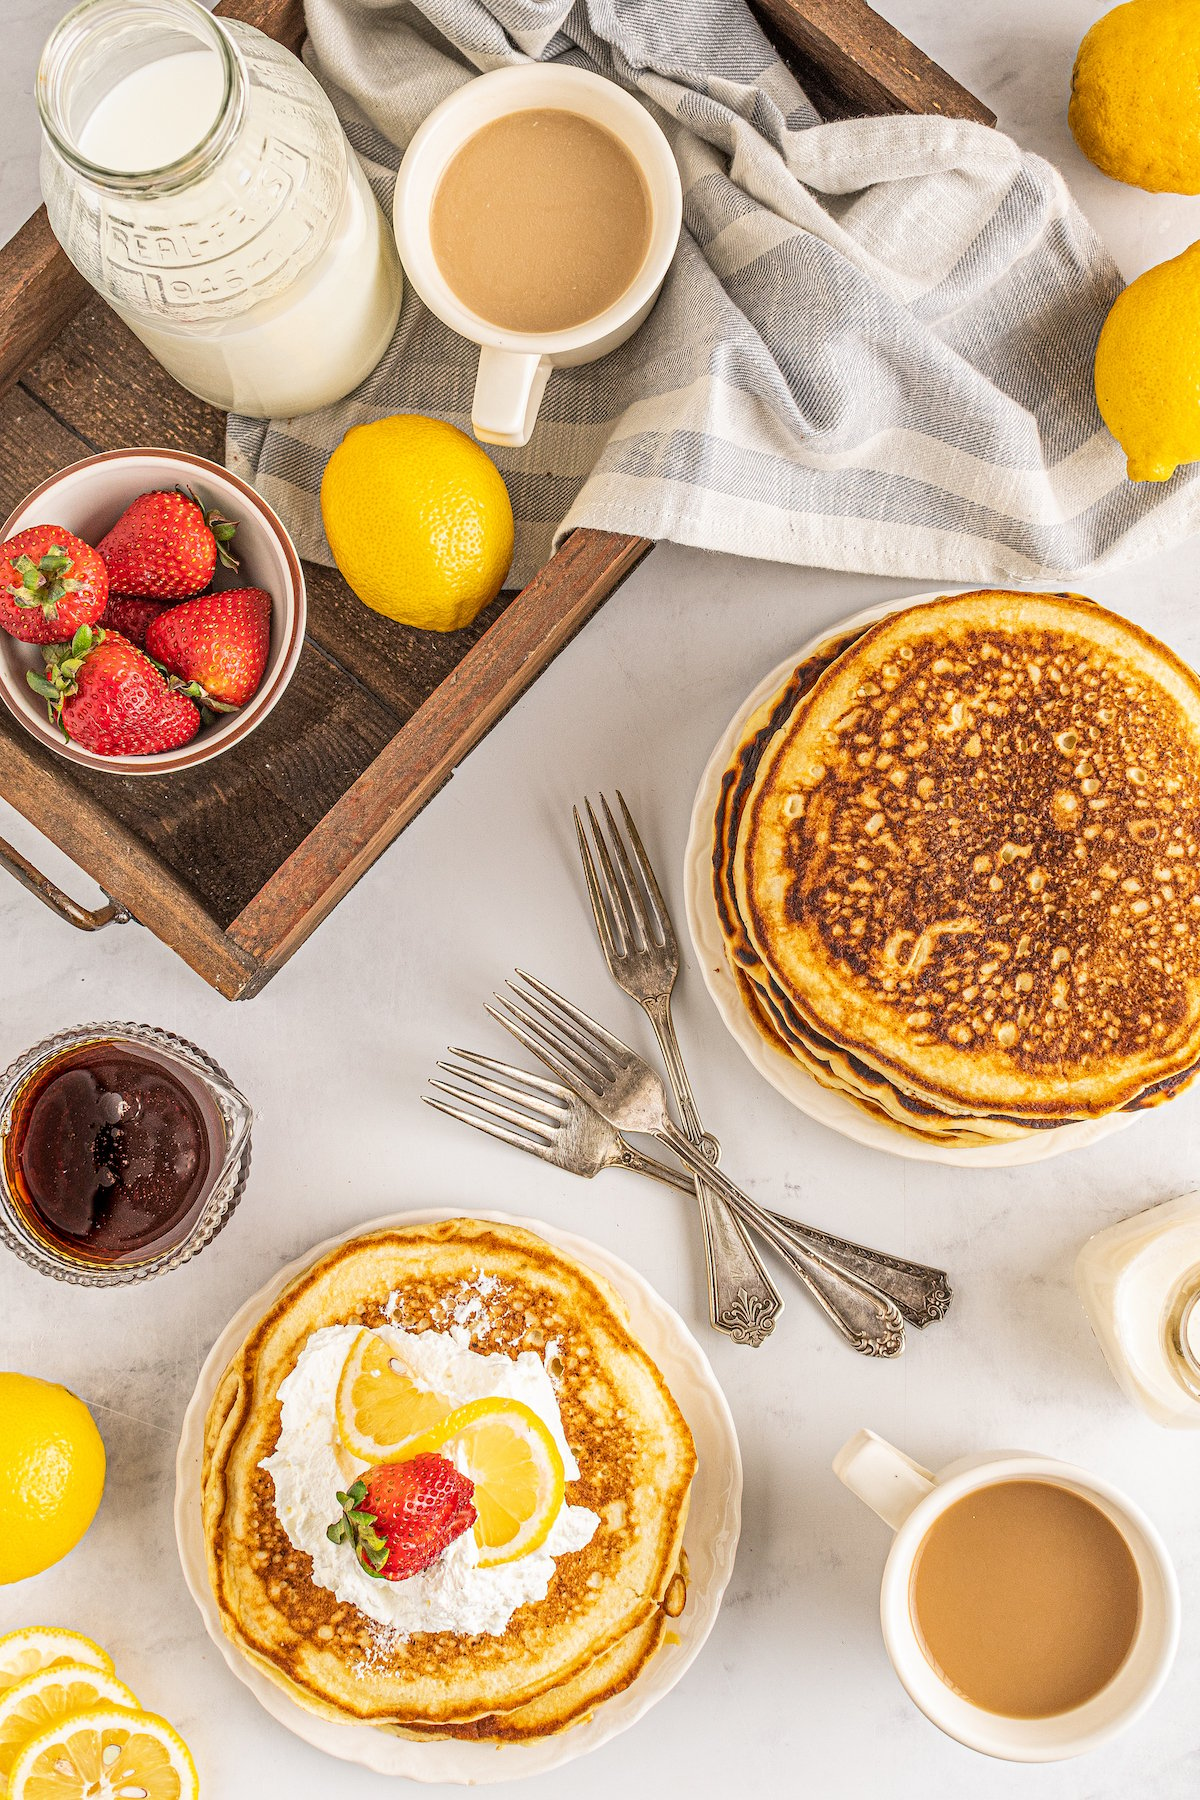 A table with milk, strawberries, lemons, coffee, cloth napkins, syrup, and a platter of homemade pancakes. Some of the pancakes have been placed and garnished on a smaller plate.